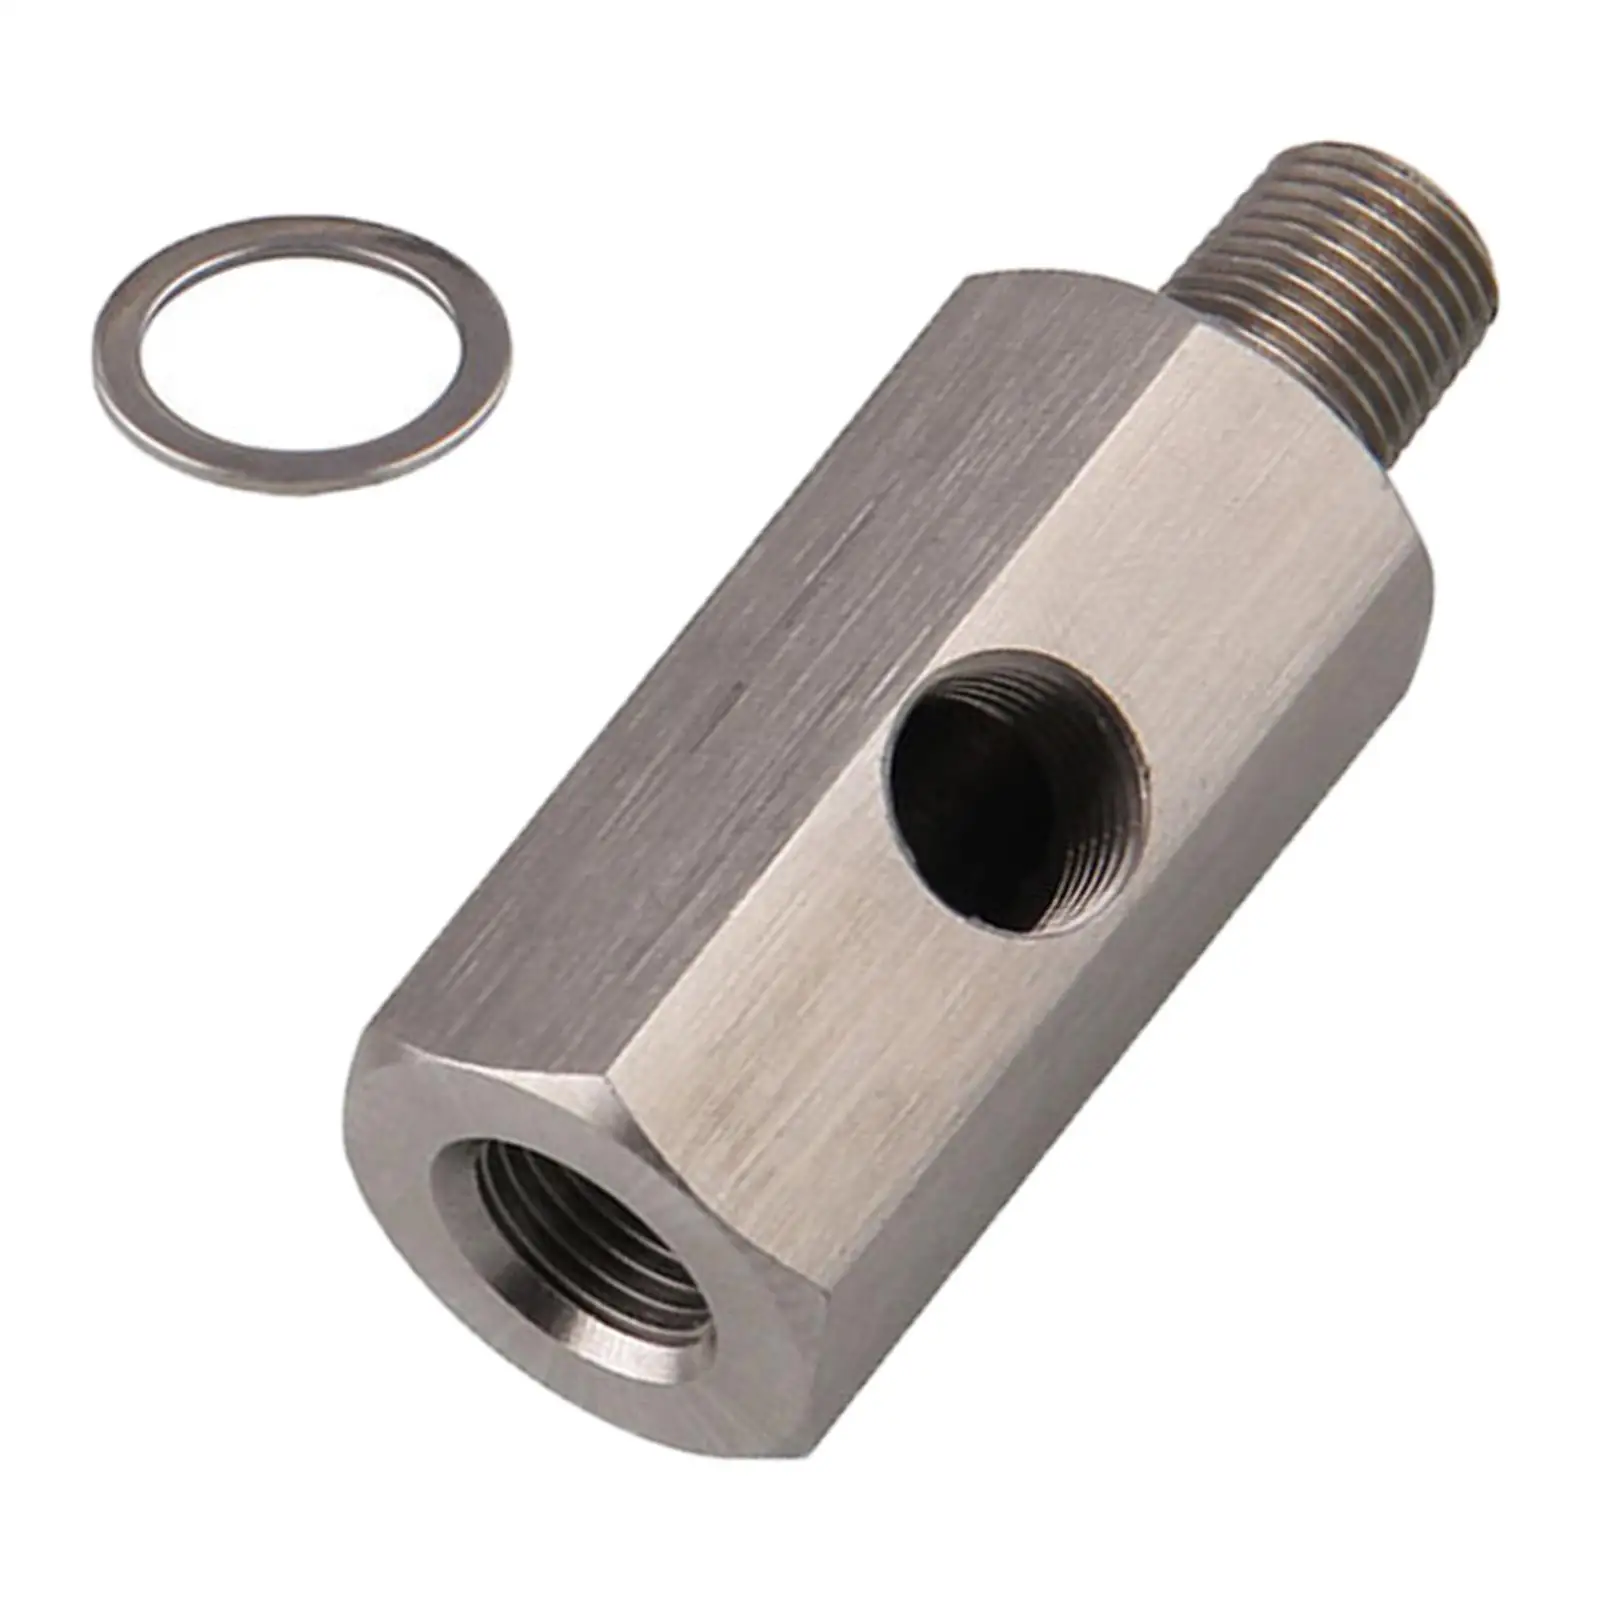 Automotive Oil Pressure Sensor  Adapter Fitting 1/8 inch NPT Stainless Steel Premium Material Durable feed Line  Replacement